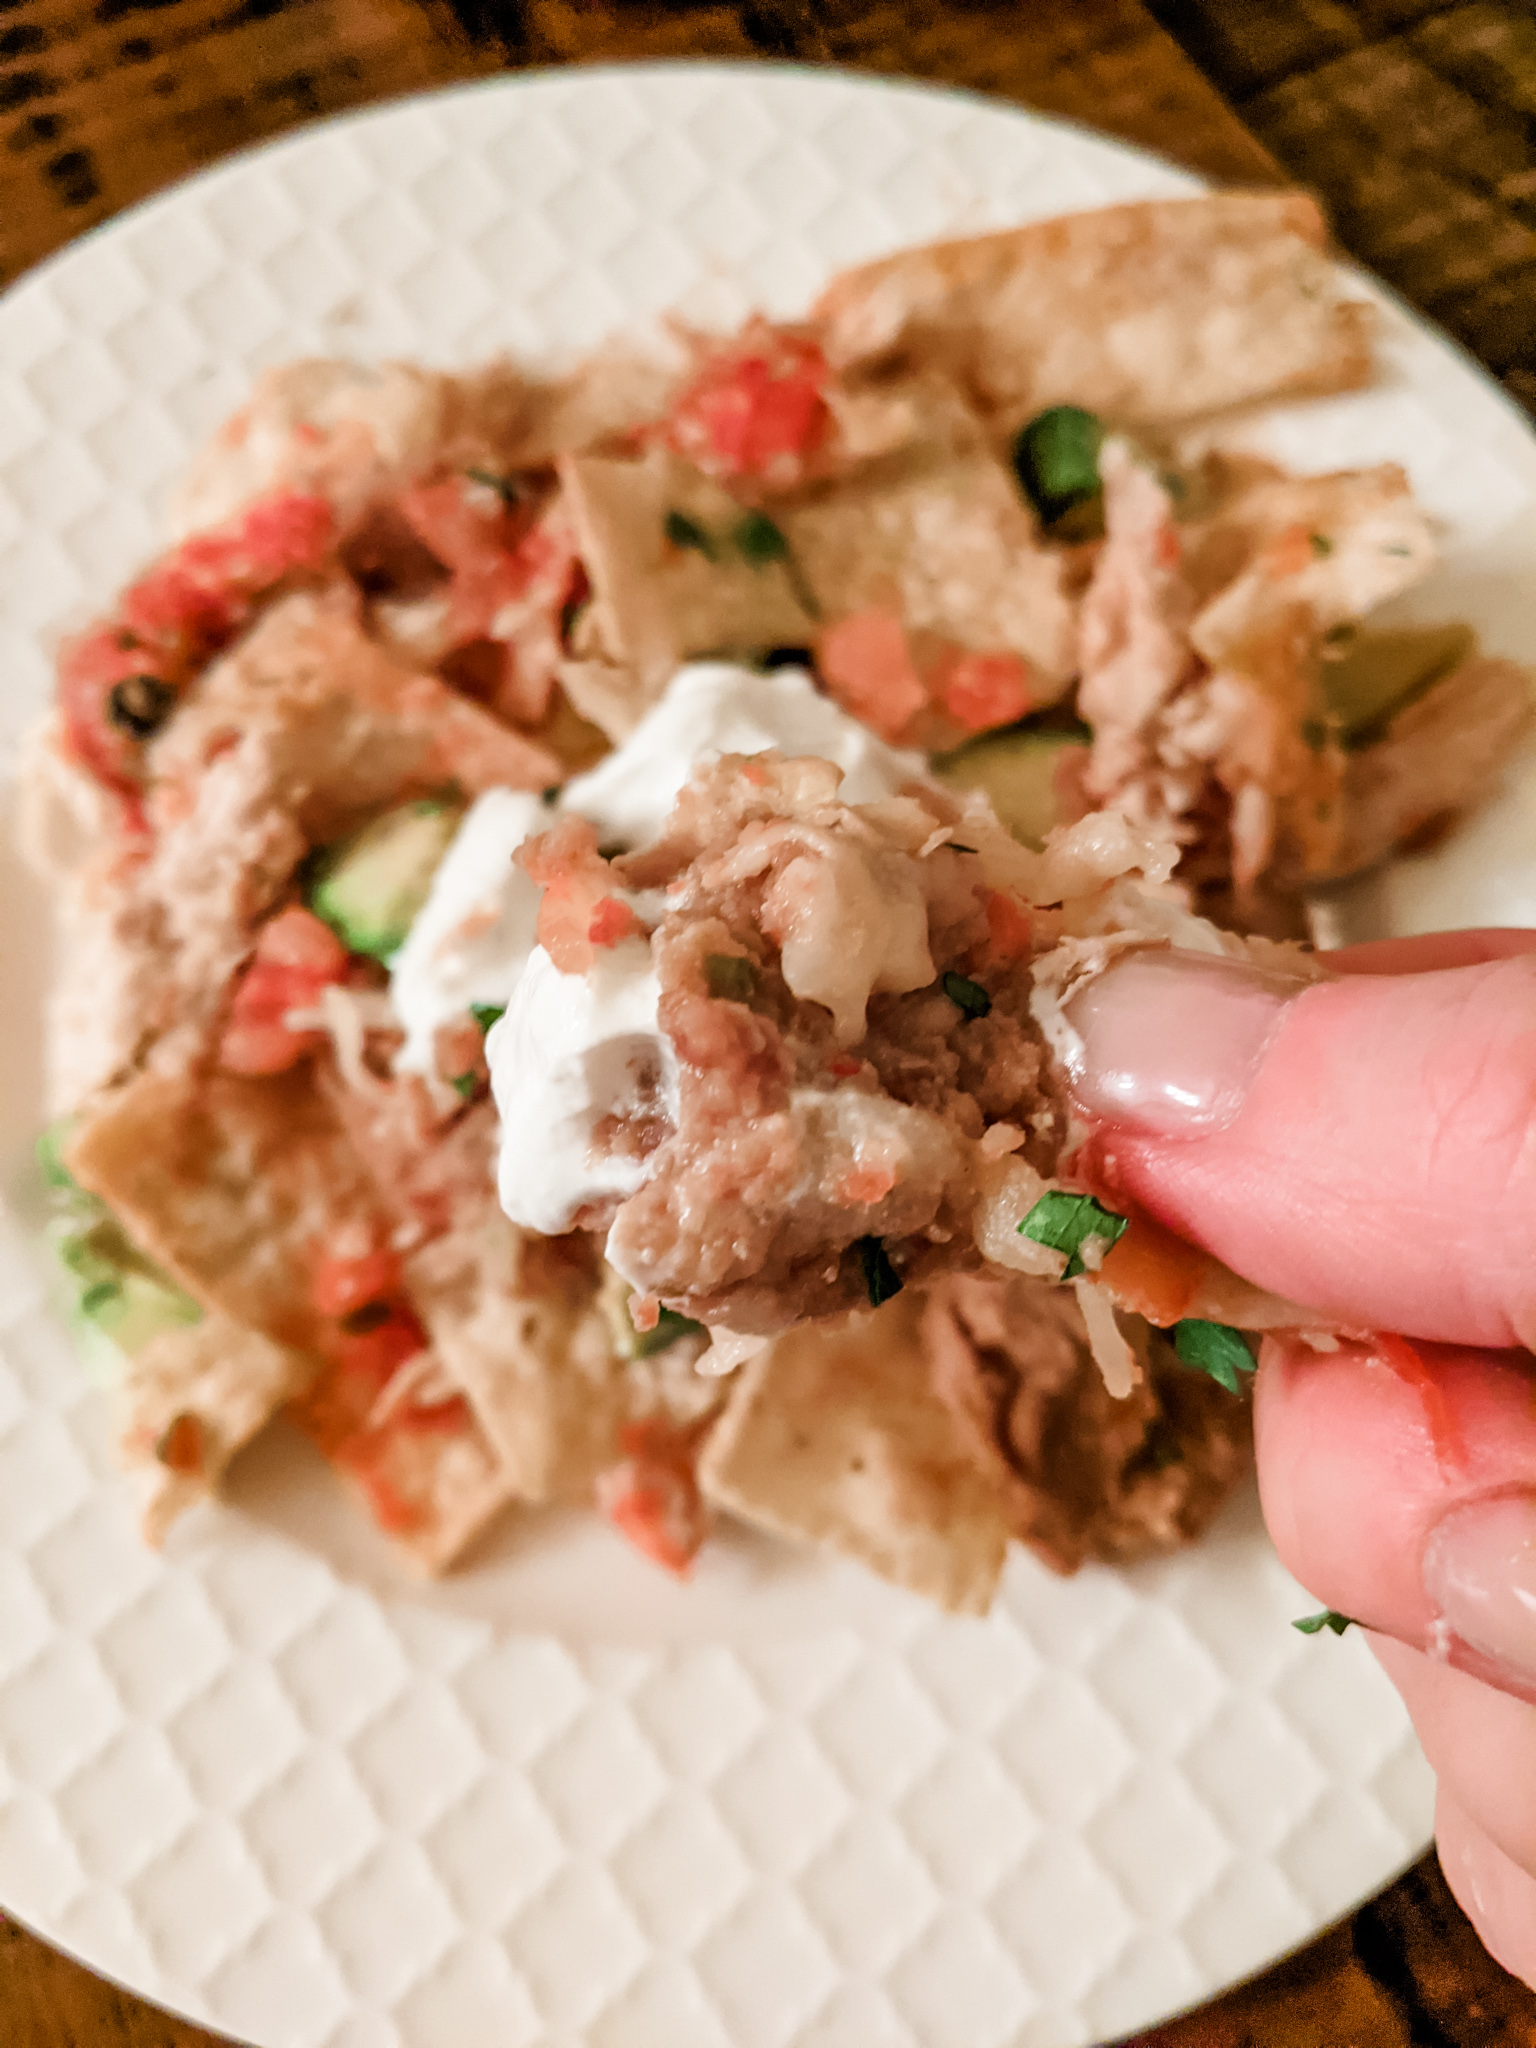 A hand holding a piece of the Healthier Chicken Nachos above a plate of them.